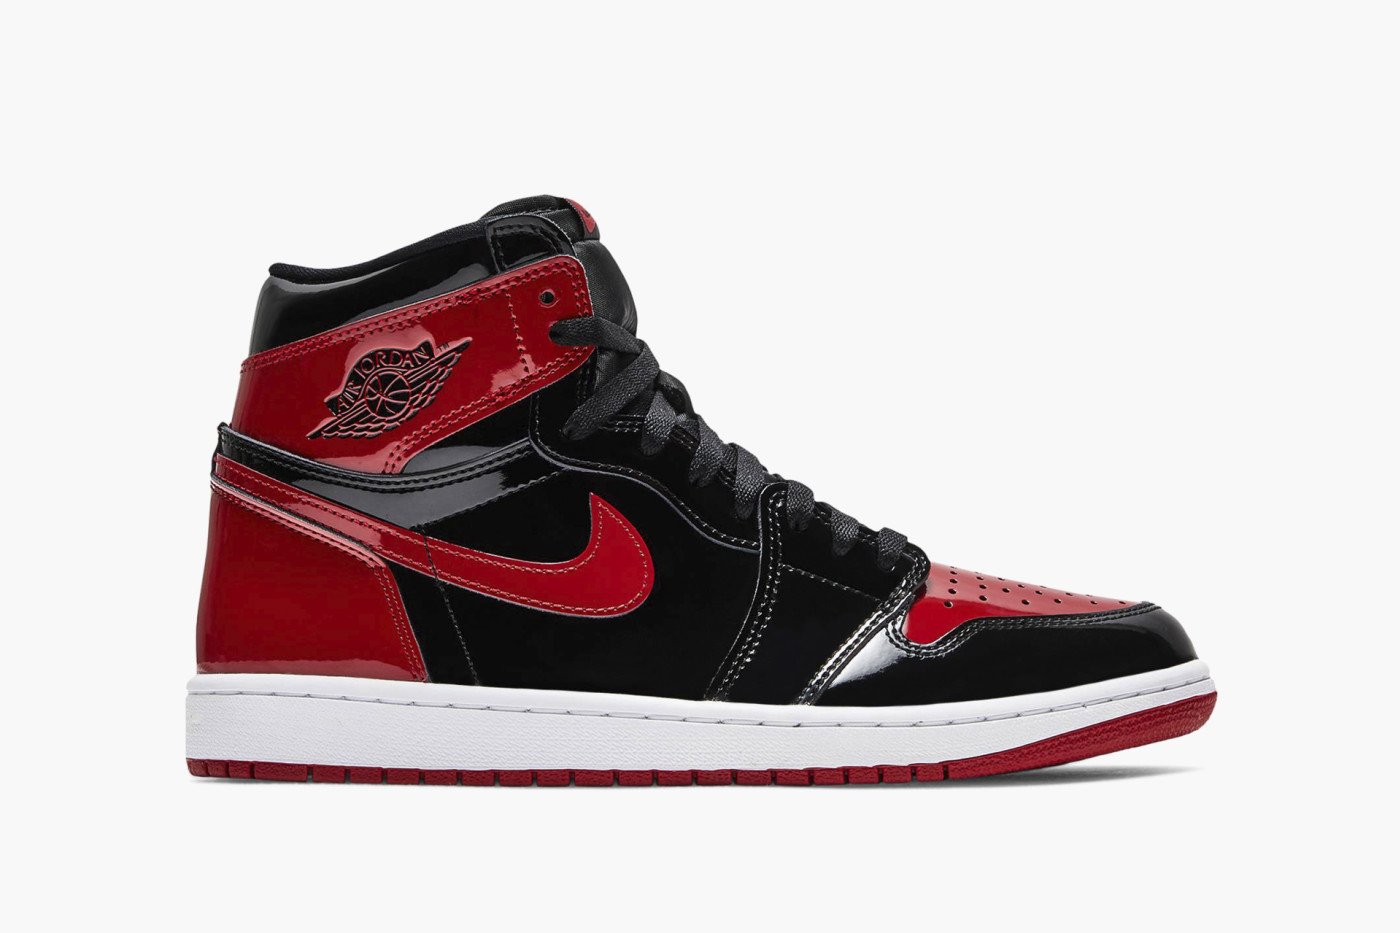 is jordan 1 real leather